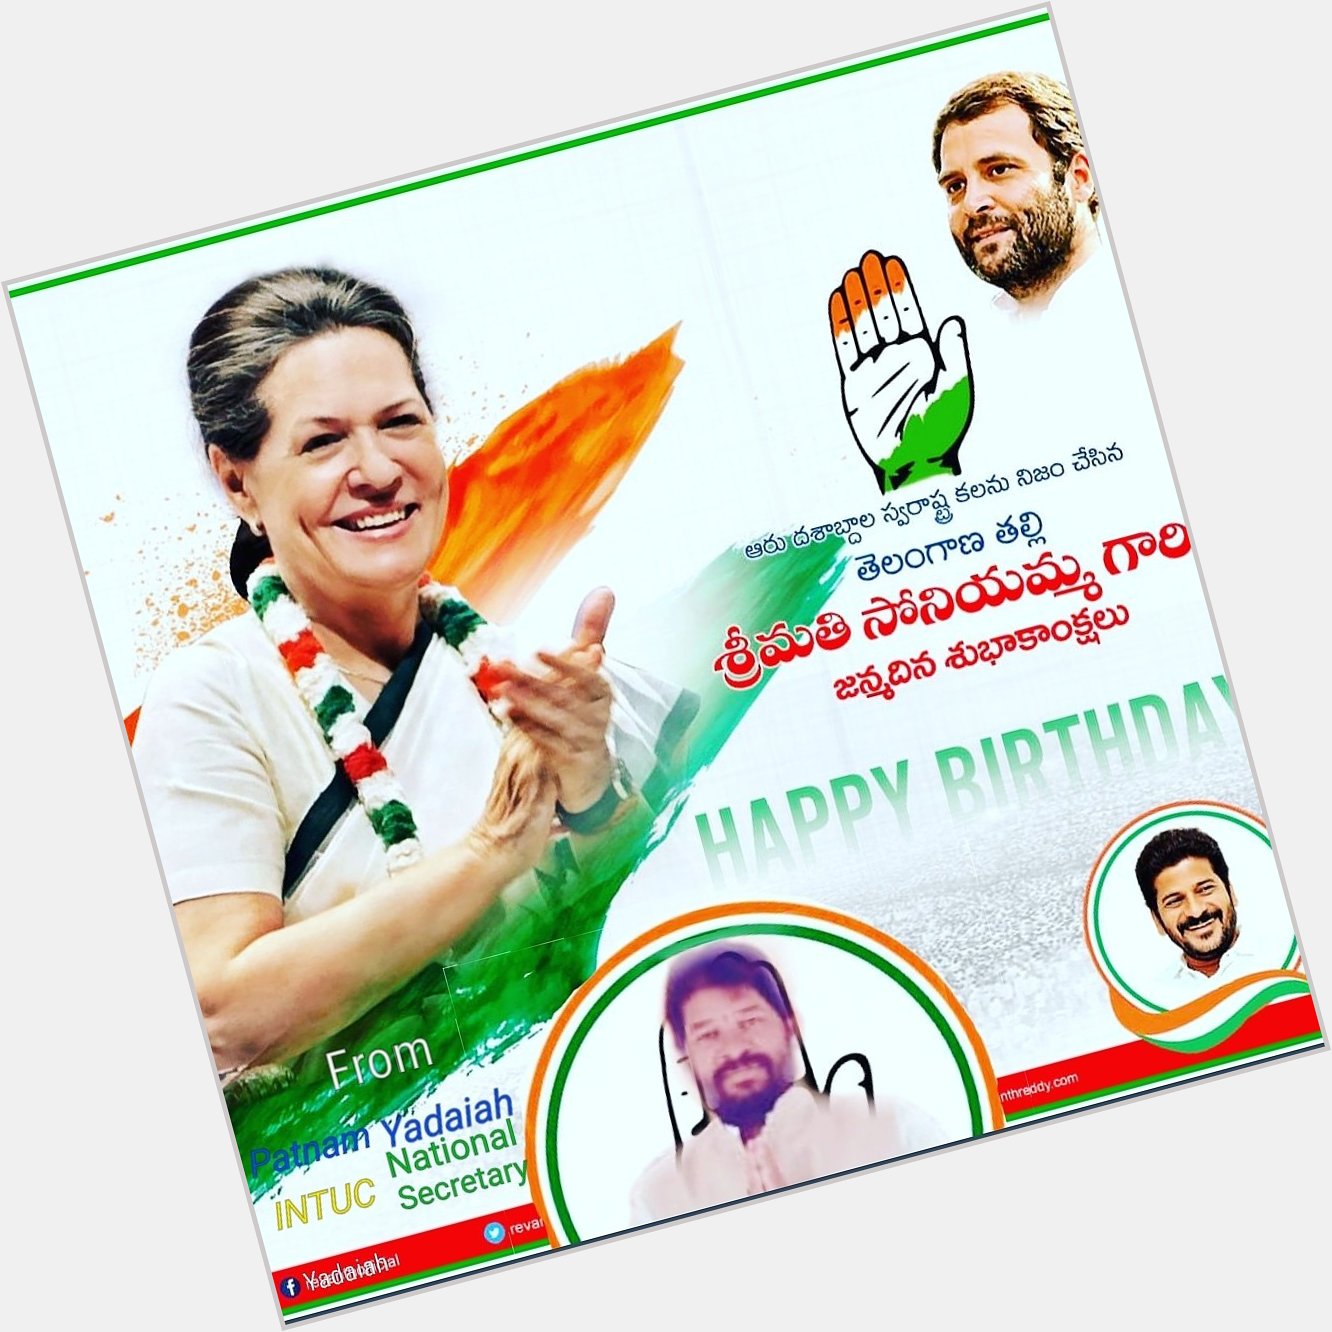 On this occasional evening 
A very happy birthday to Sonia Gandhi 